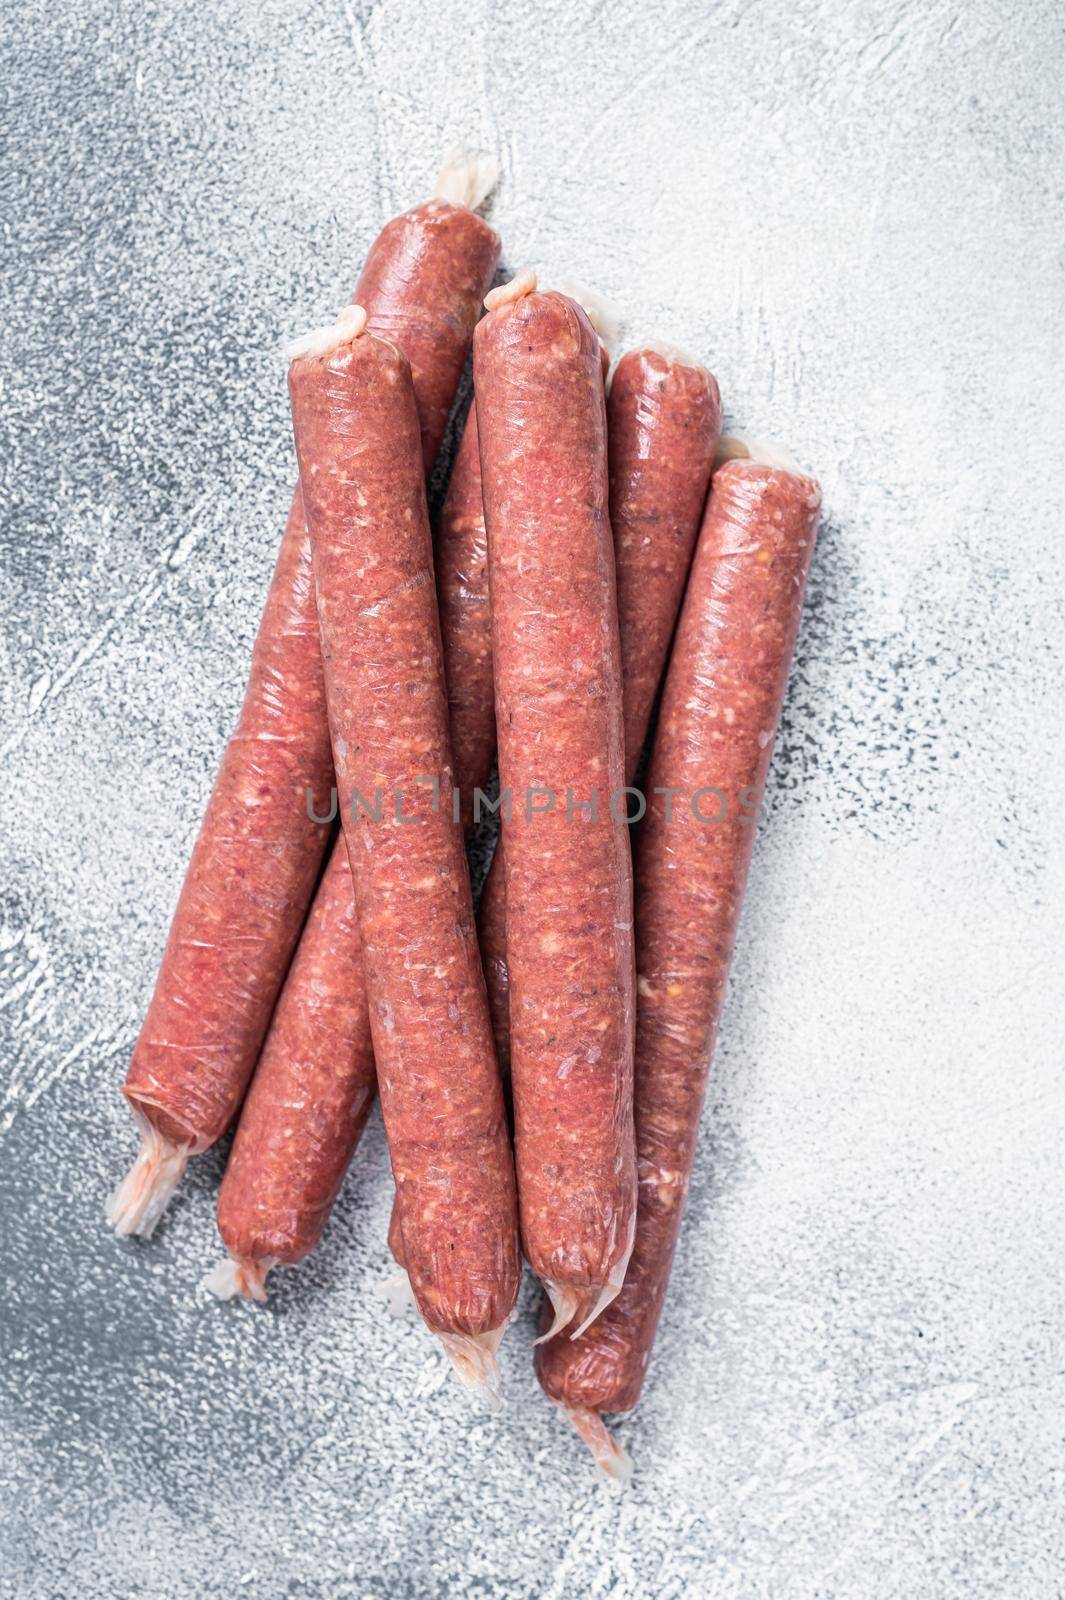 Raw butchers sausages in skins with herbs on kitchen table. White background. Top view by Composter